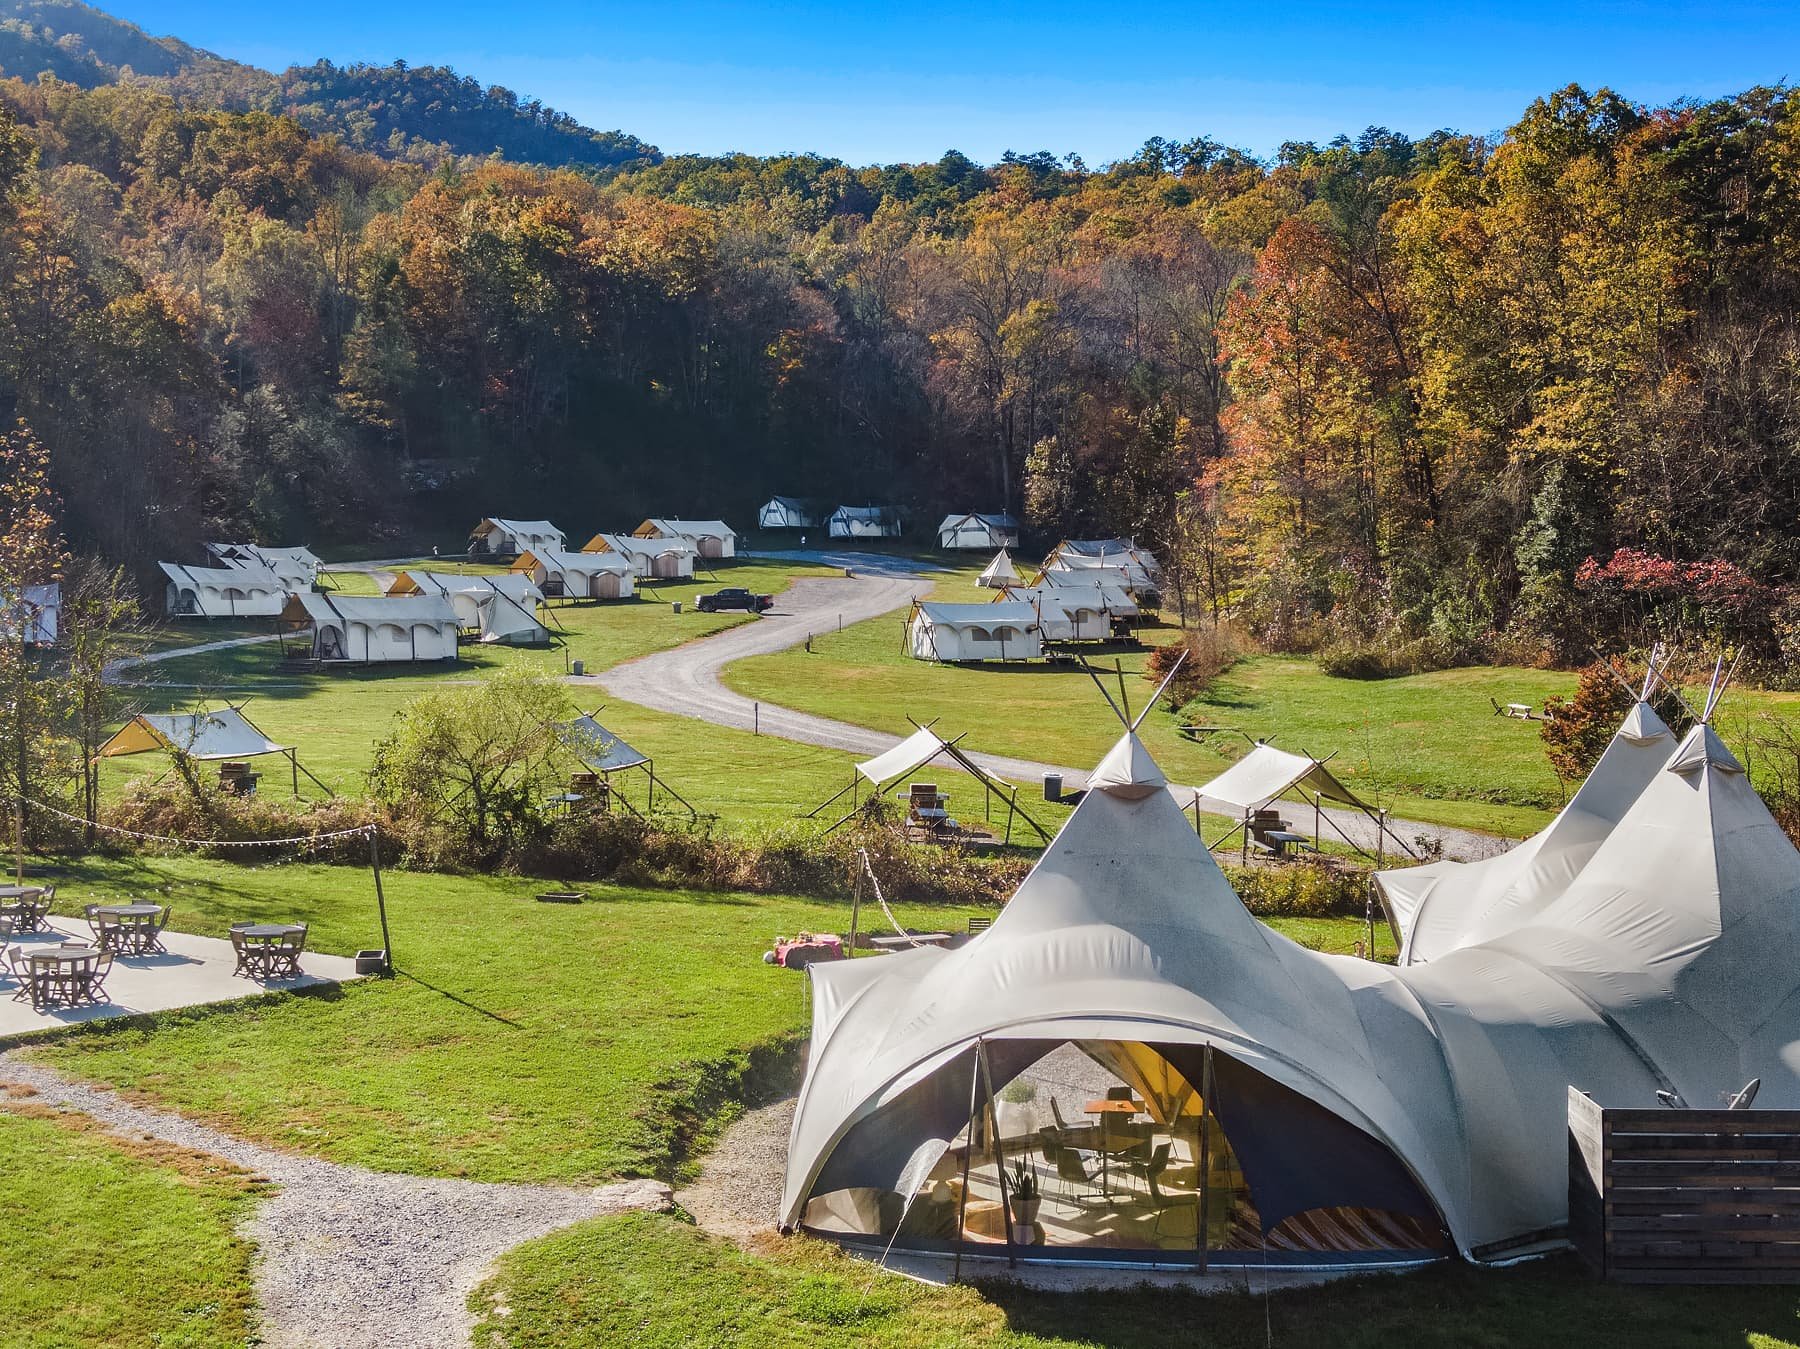 under canvas safari tent glamping grounds